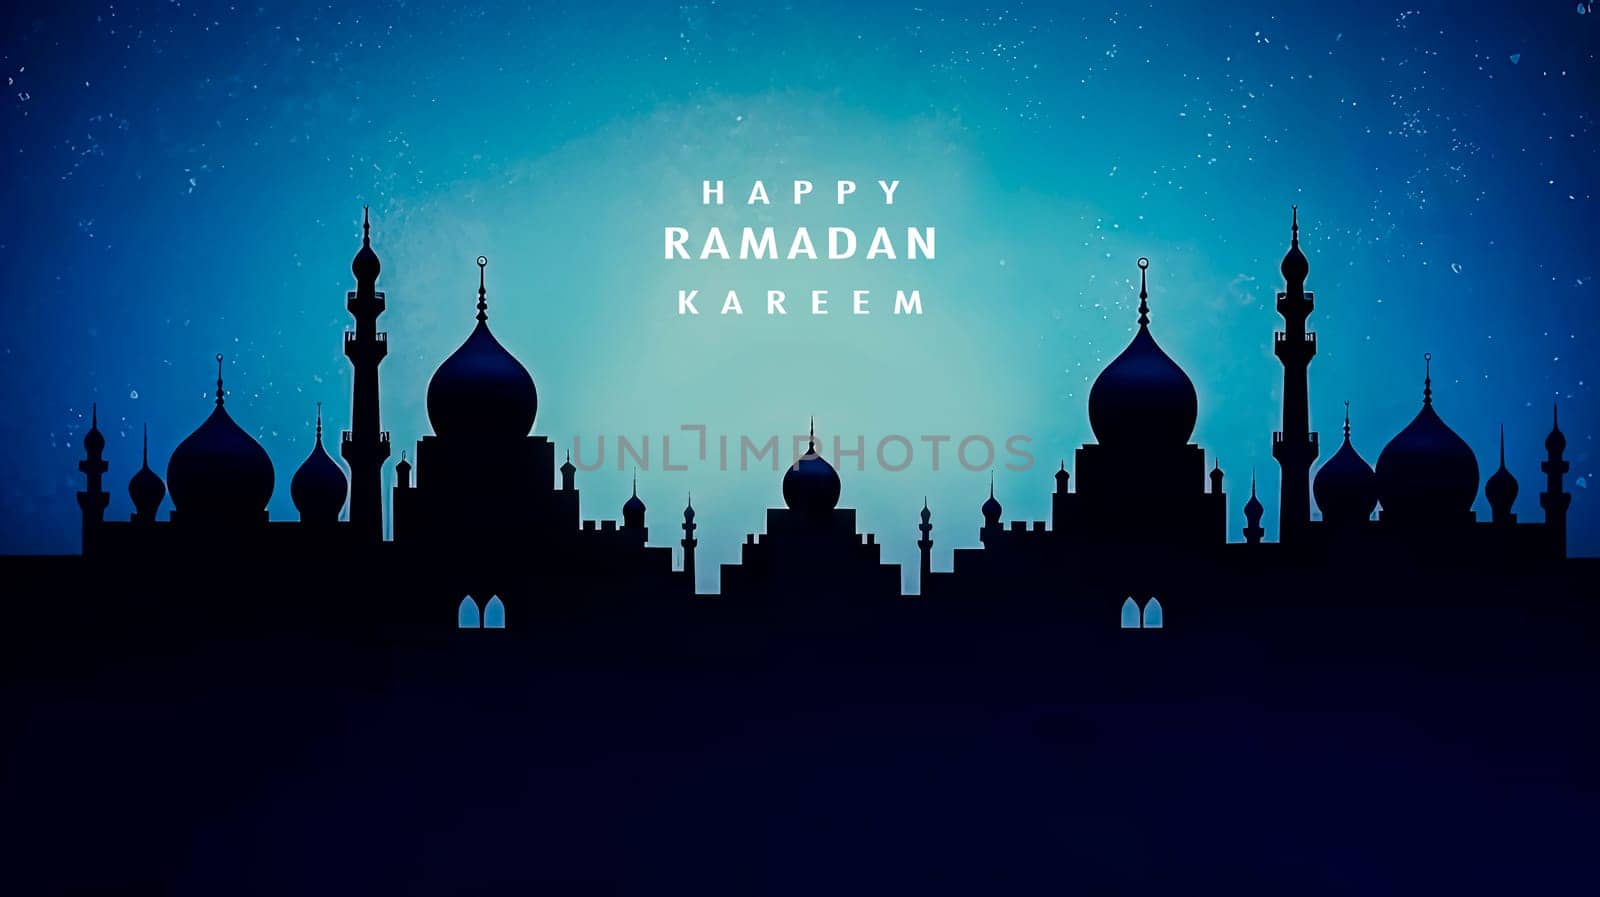 Ramadan serenity, A mosque illuminated at night Ramadan Mubarak messages intertwine with the quiet beauty of the holy month's celebration